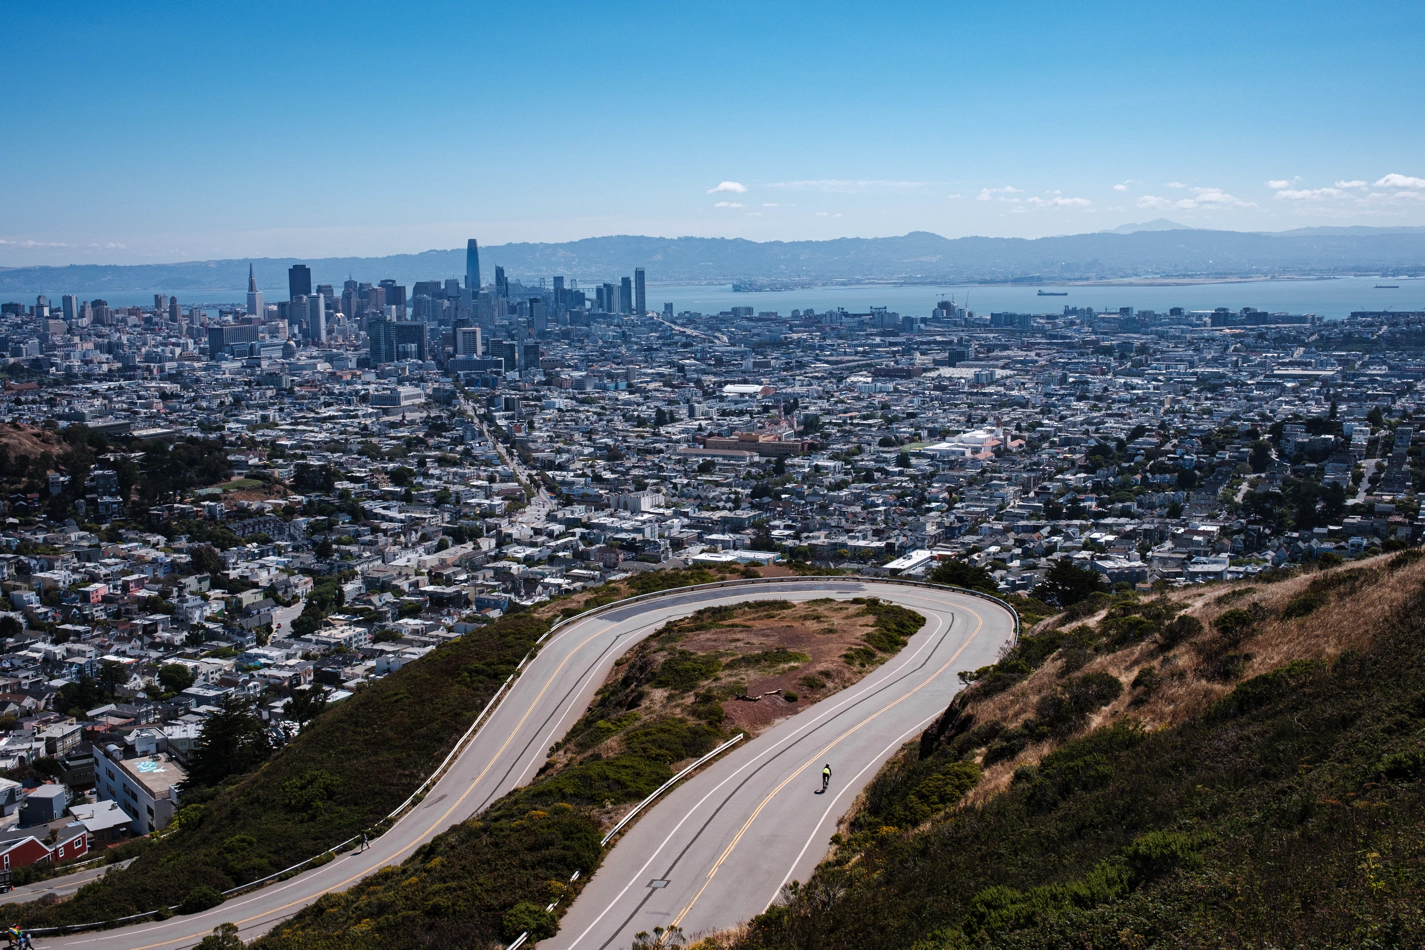 Downtown San Francisco, seen from Twin Peaks. A road curves around itself in the foreground and a lone cyclist can be seen as a tiny dot.